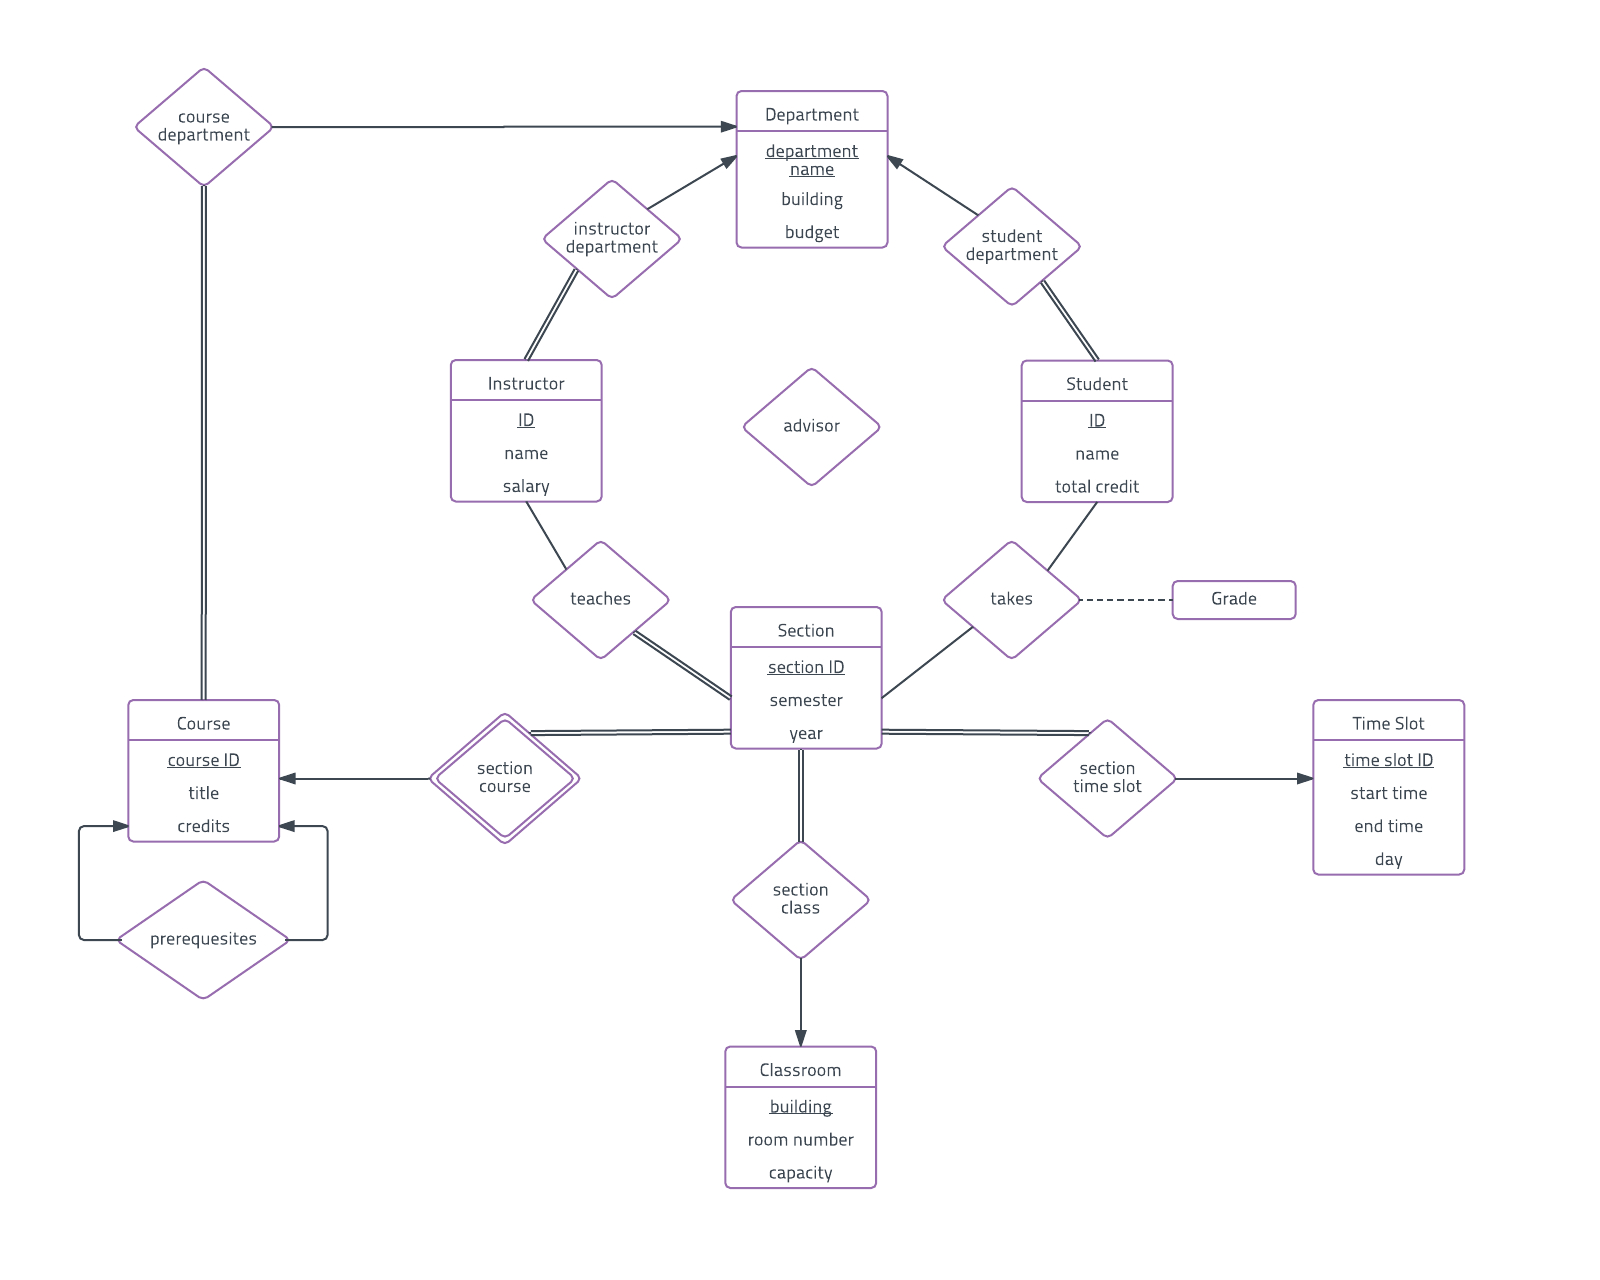 Er Diagram Examples And Templates | Lucidchart with regard to U In Er Diagram